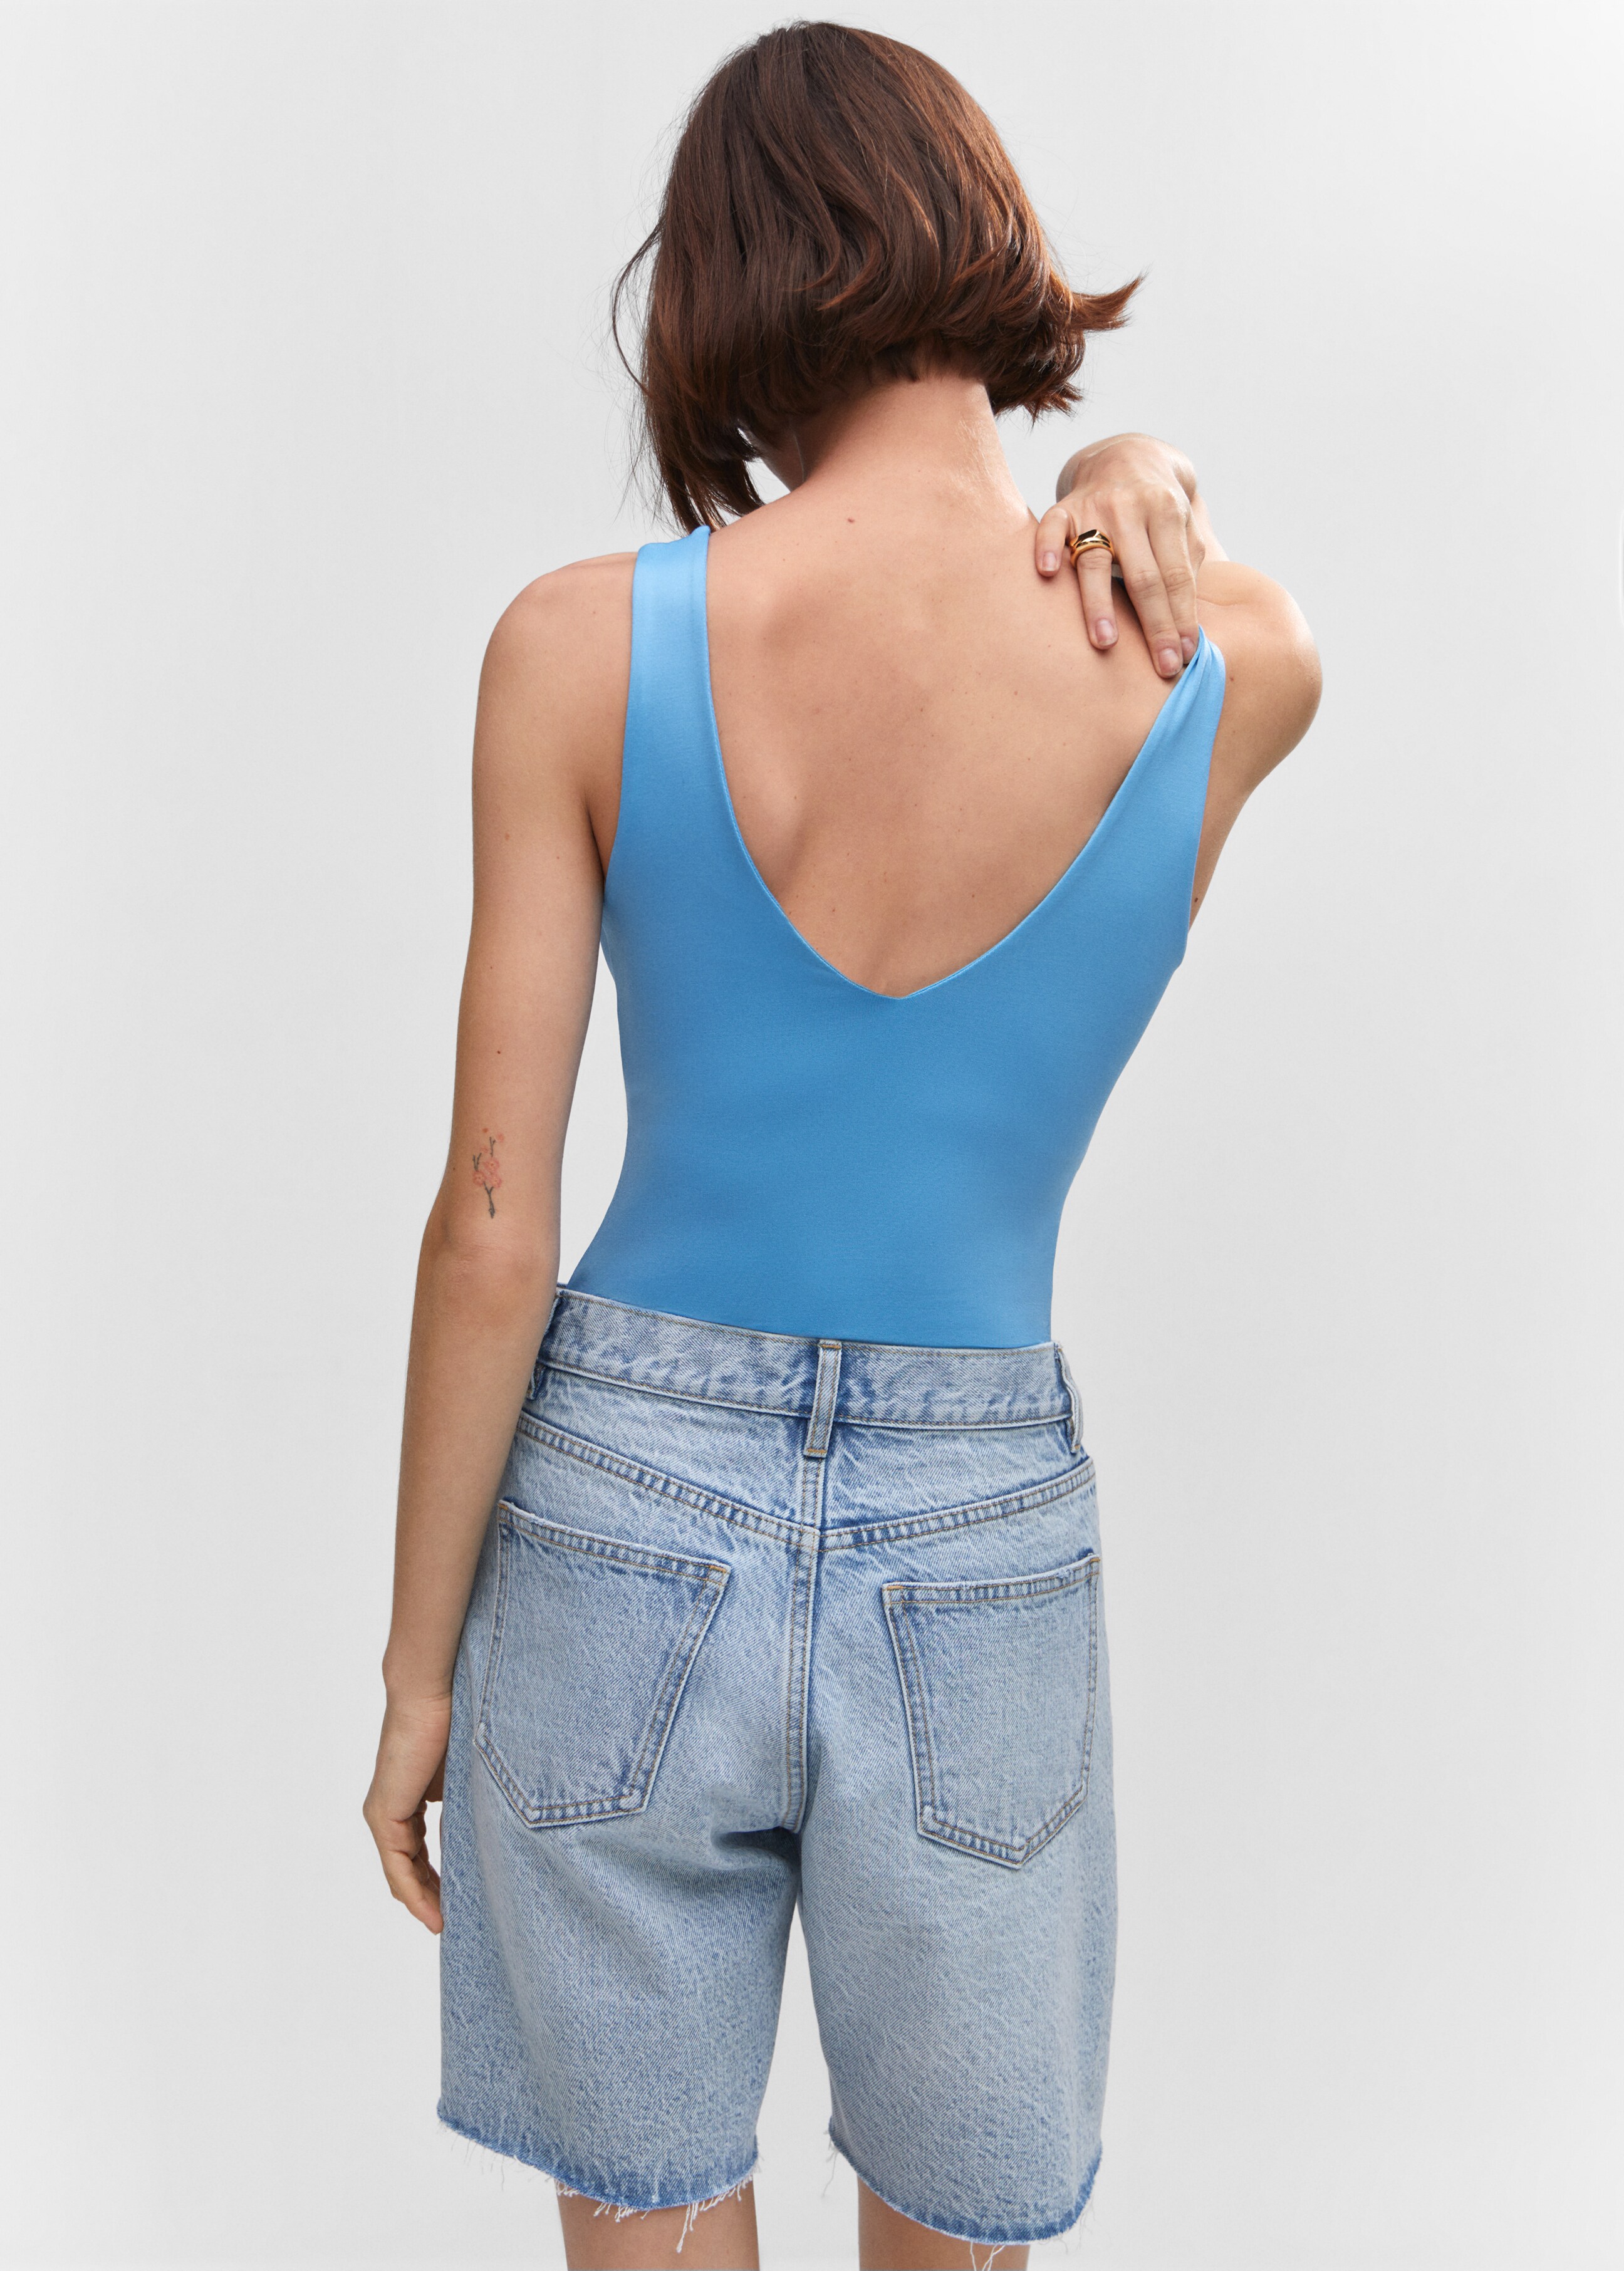 Back neckline body - Reverse of the article